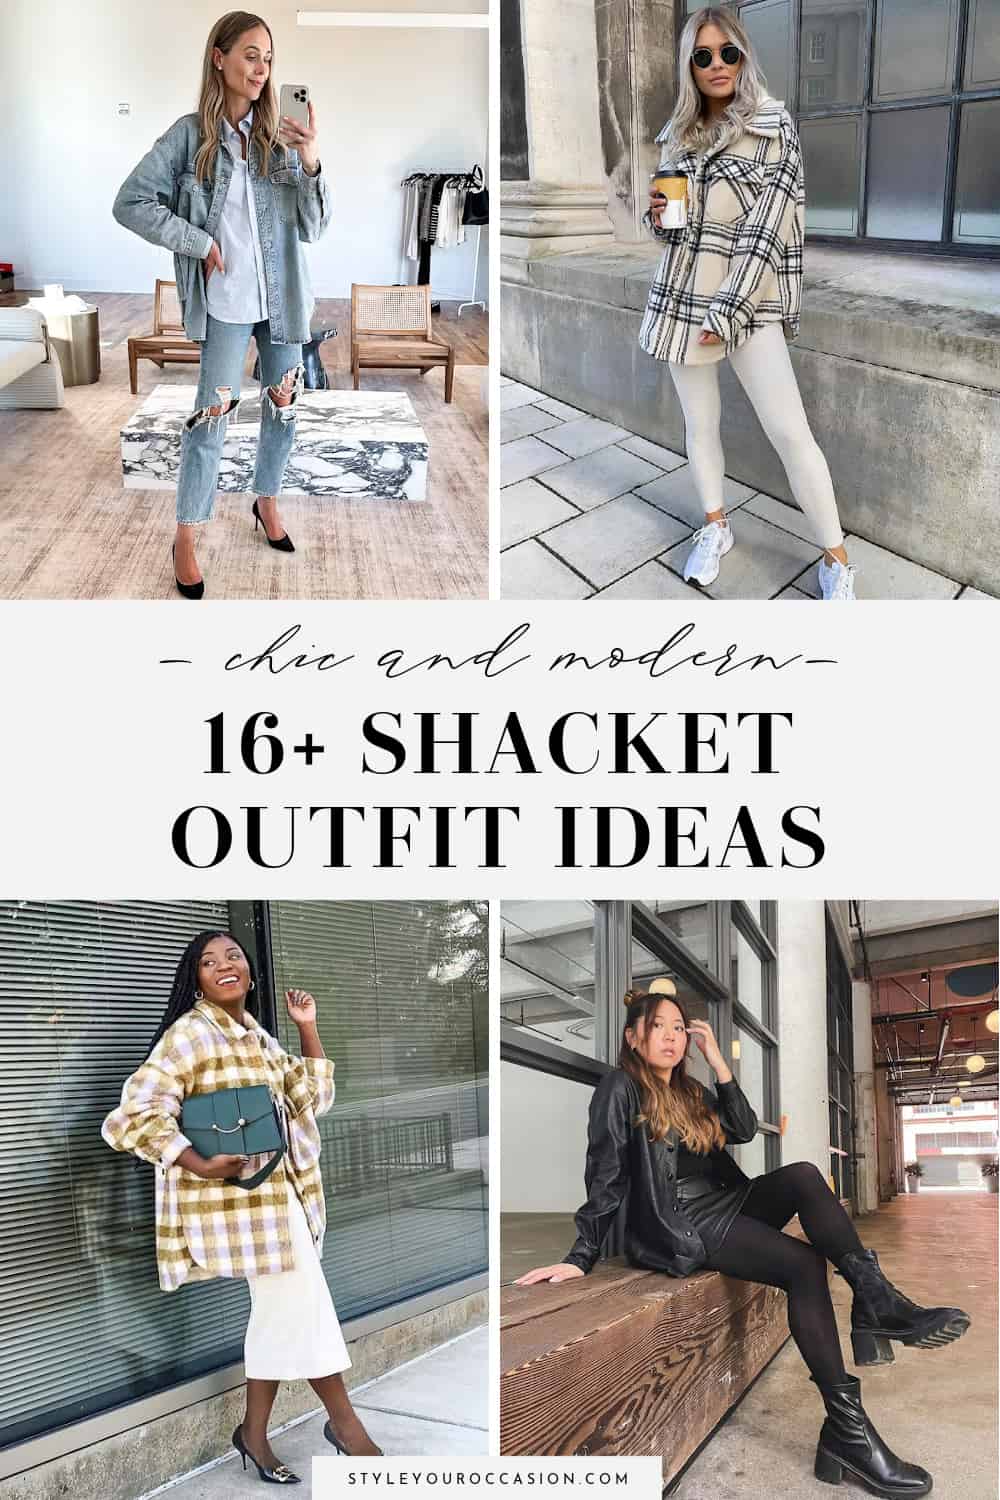 How To Wear A Shacket: 16+ Chic Shacket Outfit Ideas To Copy